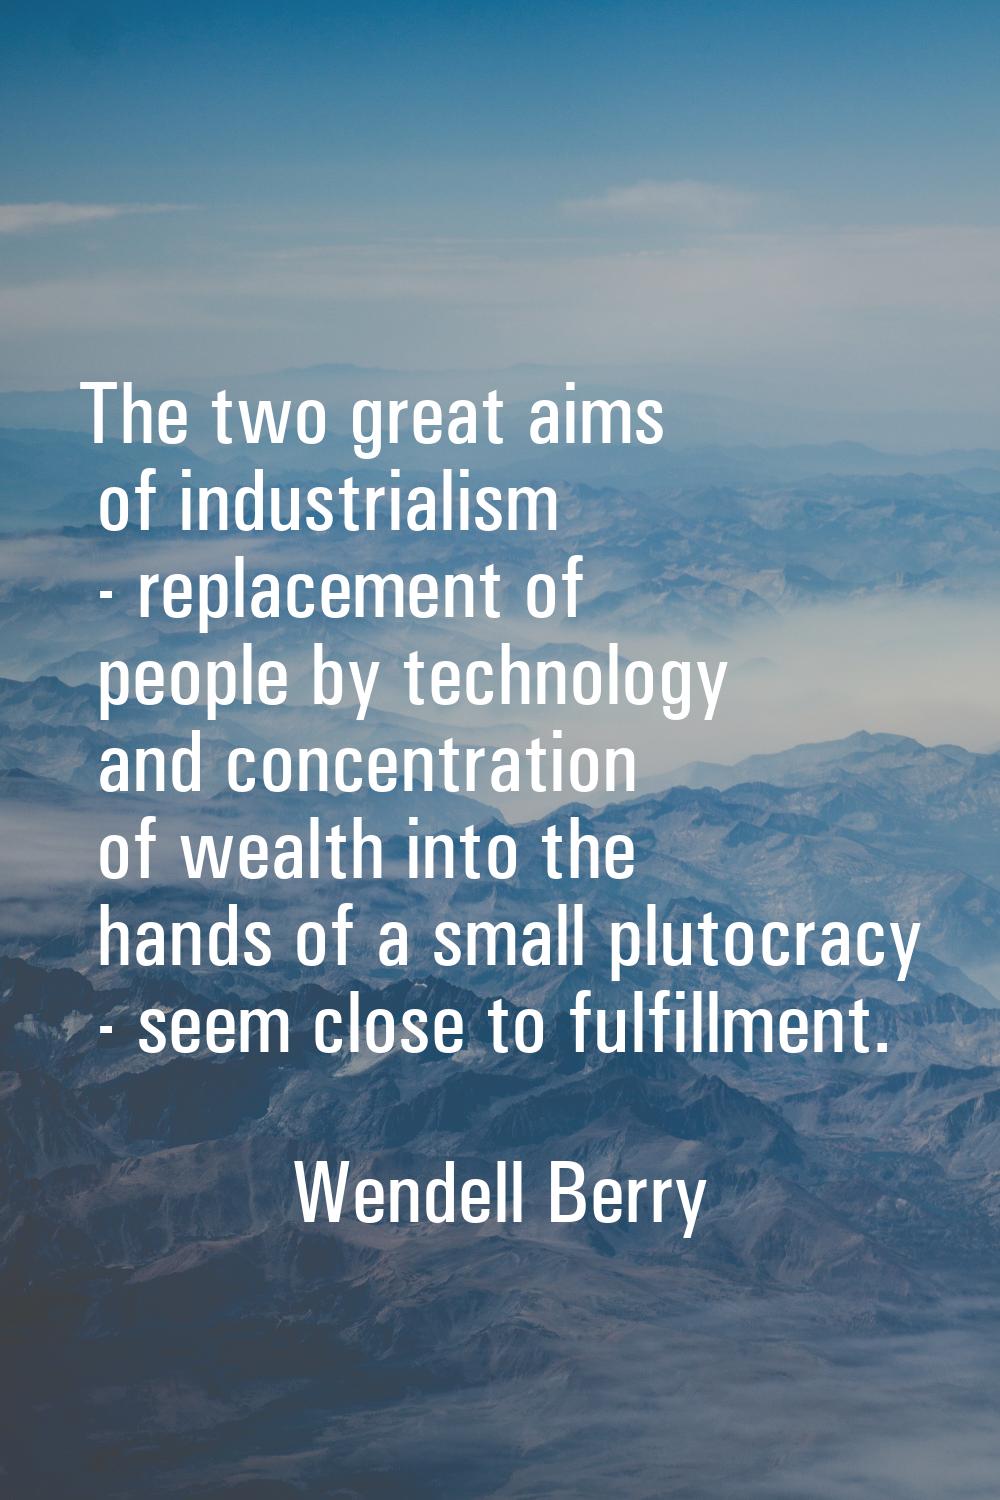 The two great aims of industrialism - replacement of people by technology and concentration of weal